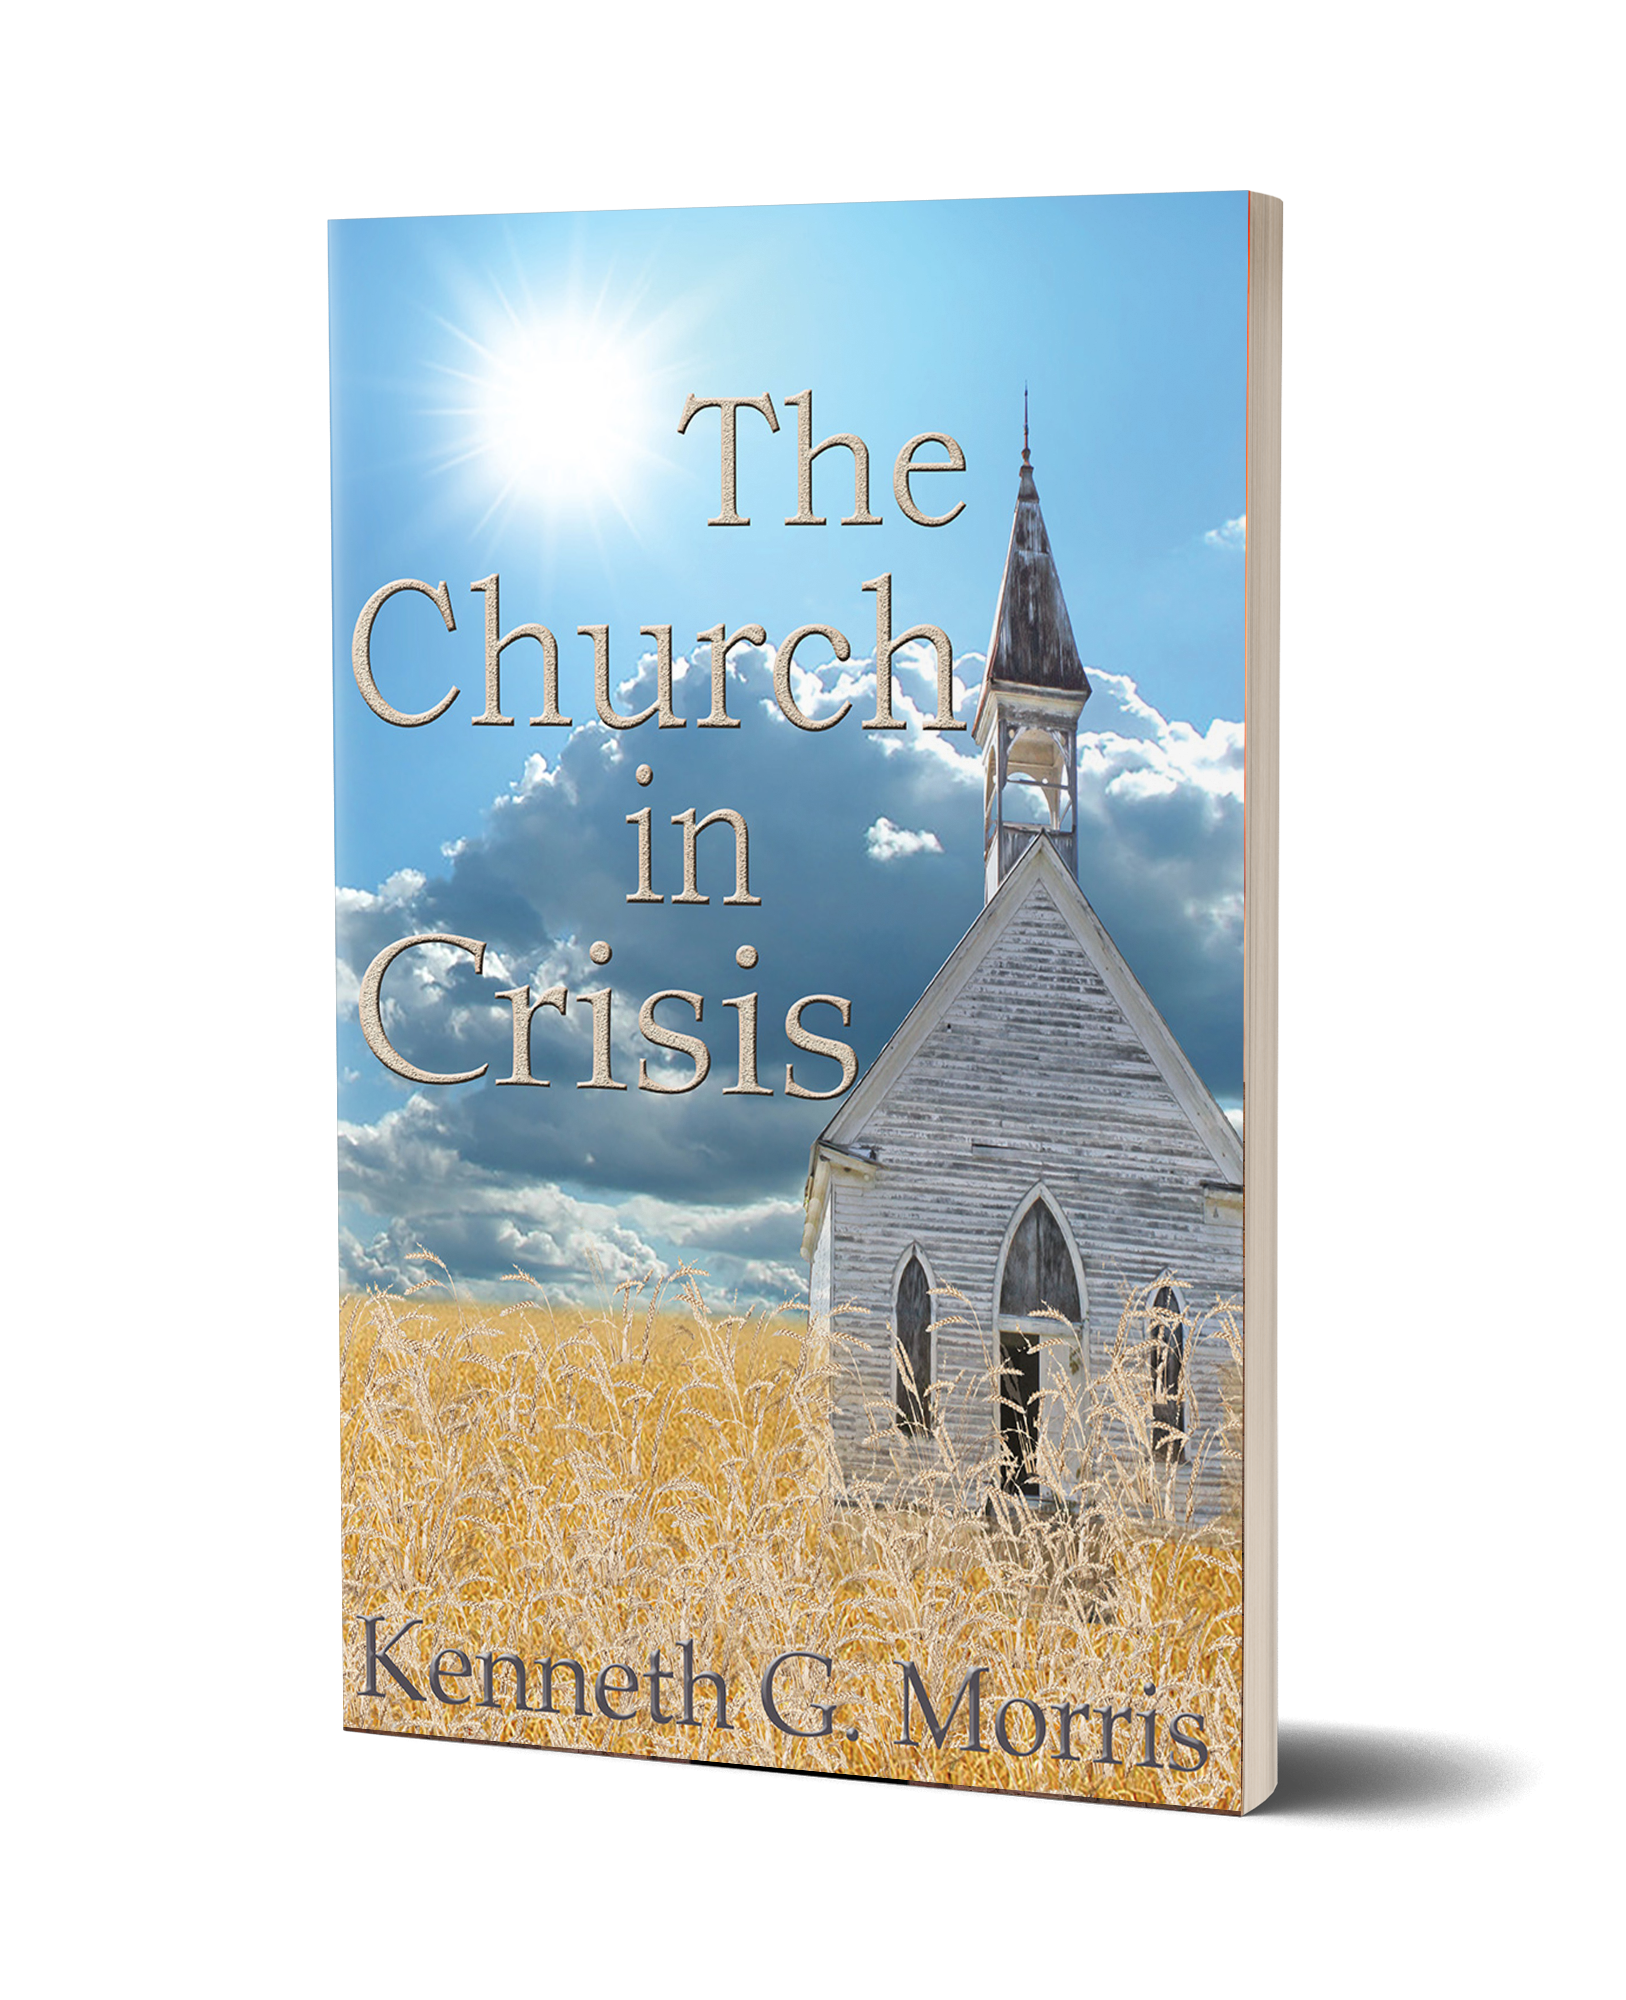 The Church in Crisis by Kenneth G. Morris